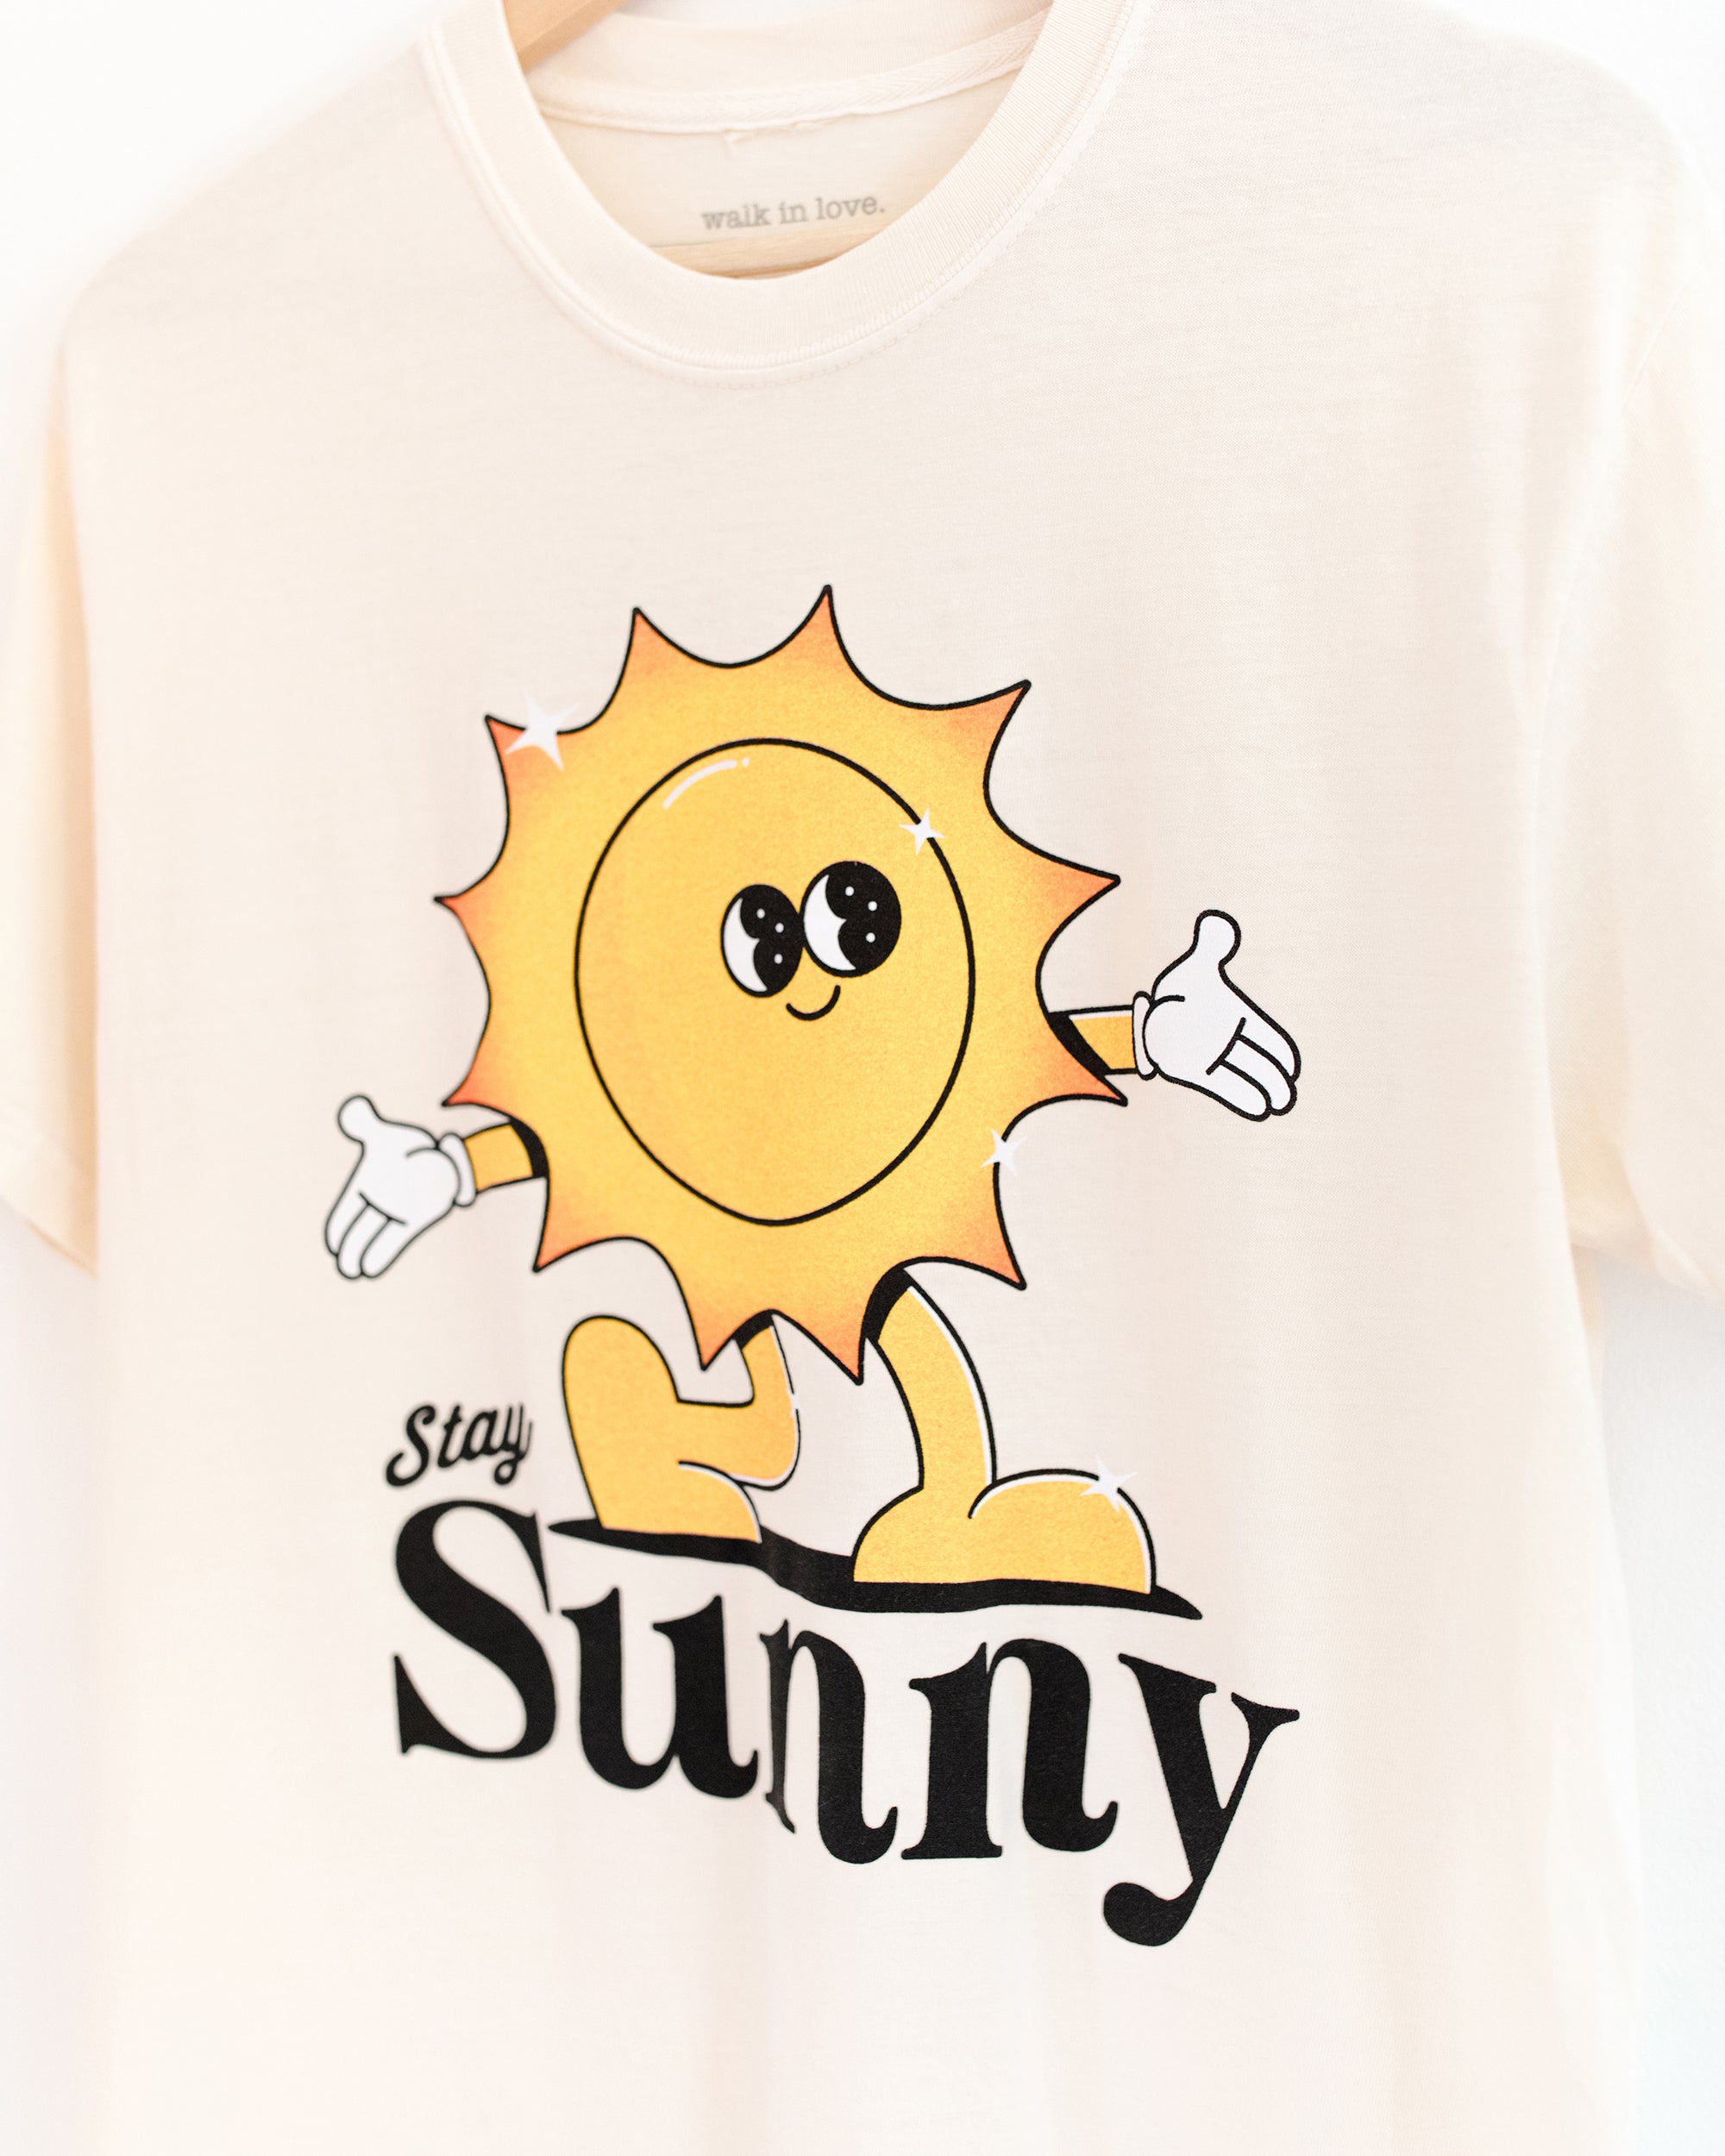 Stay Sunny Vintage Washed Ivory Tee